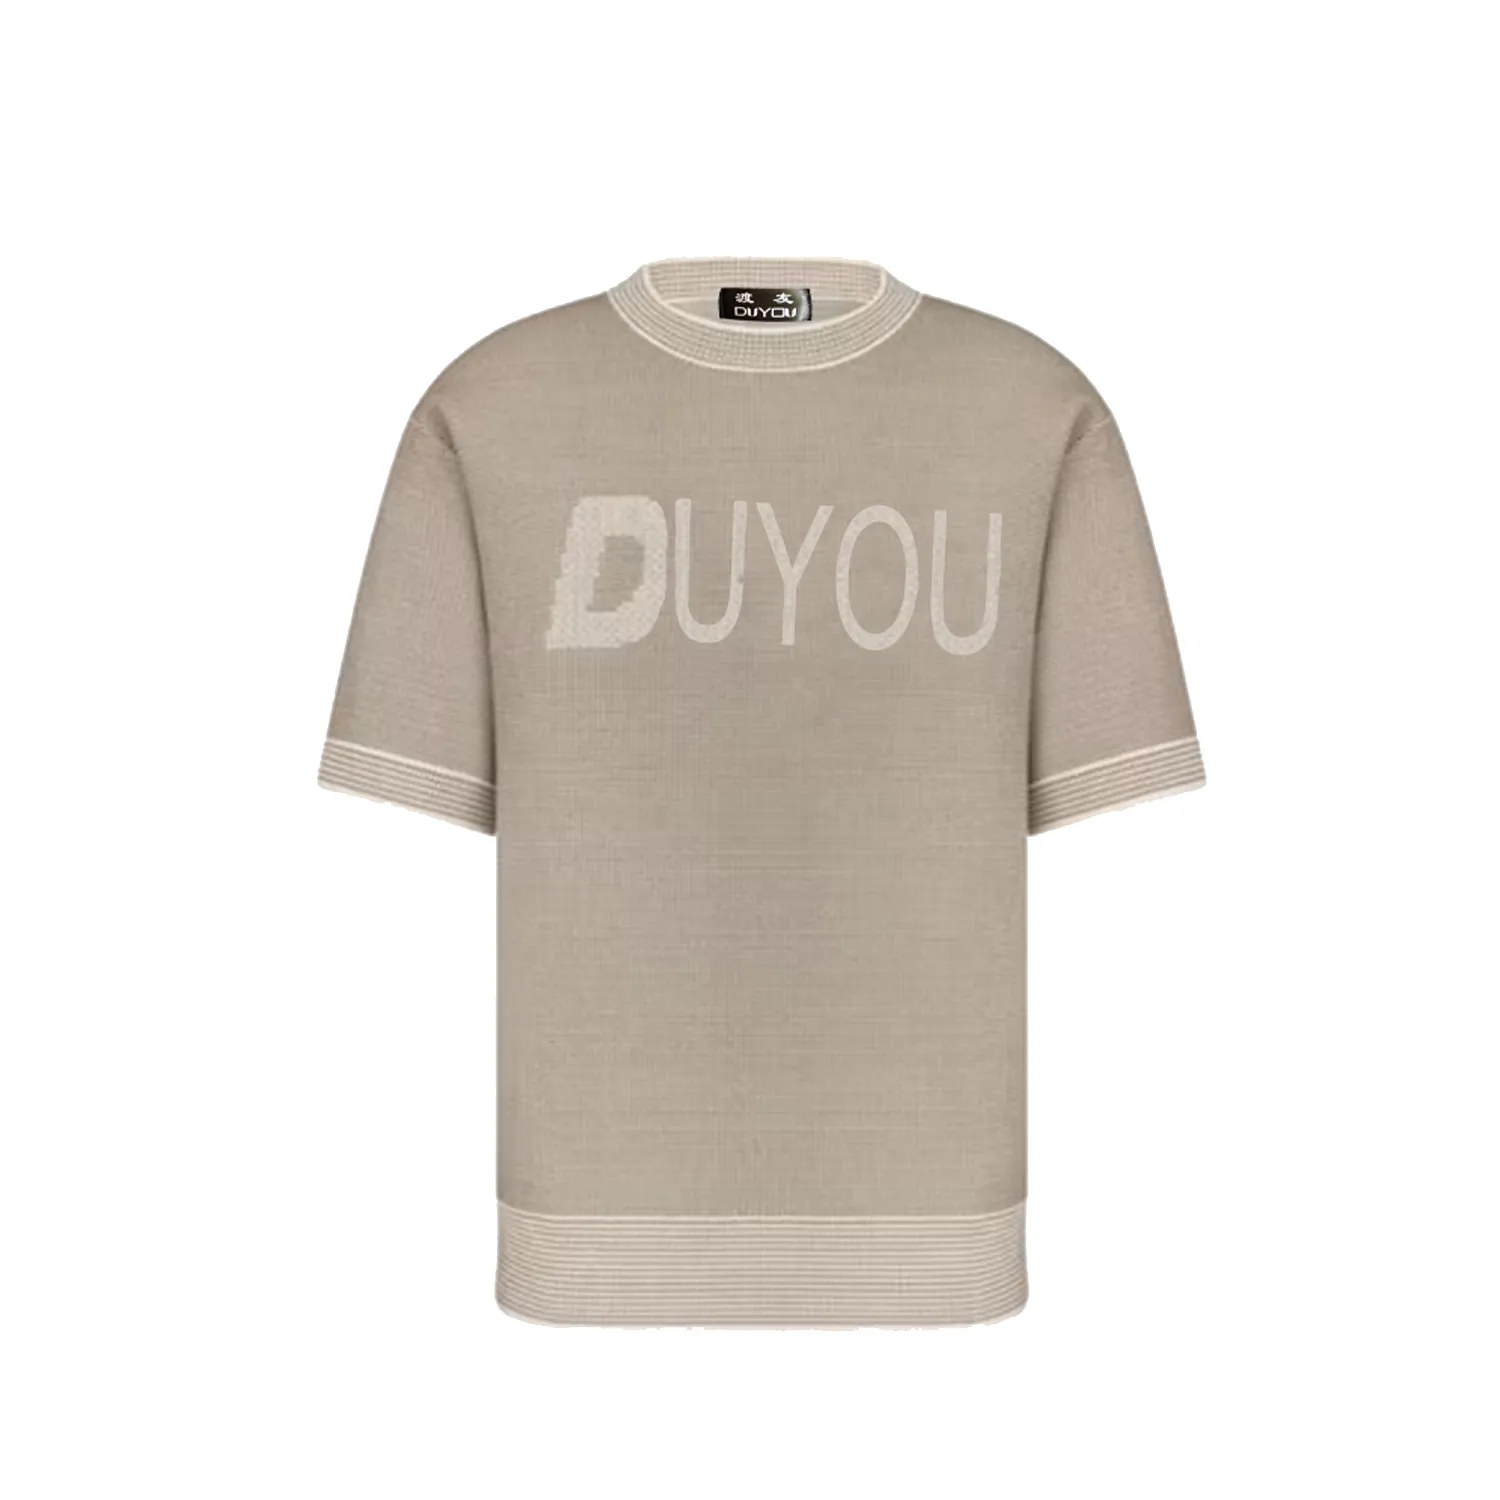 DUYOU Men's T-Shirts Beige Cotton Blend Knit Sweater Print Color Casual Stretched Slim Fit Homme Pullovers Men's Clothing Tops 84596